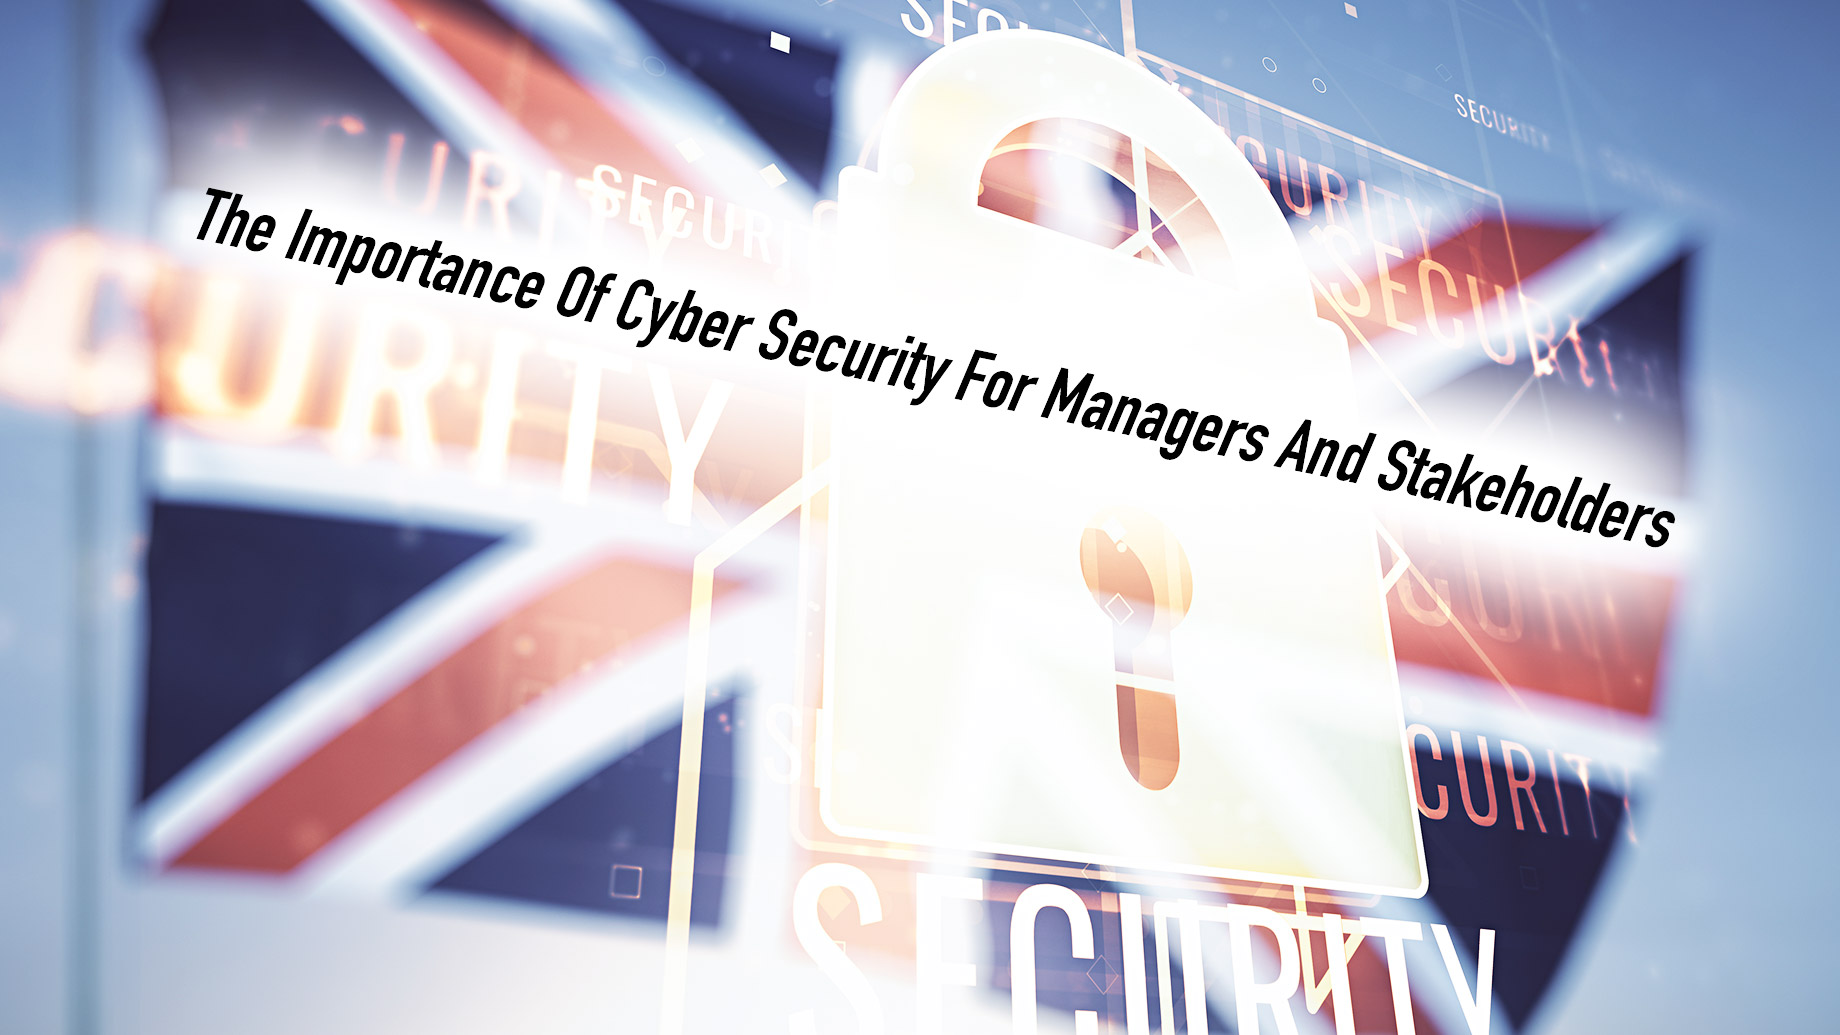 The Importance Of Cyber Security For Managers And Stakeholders